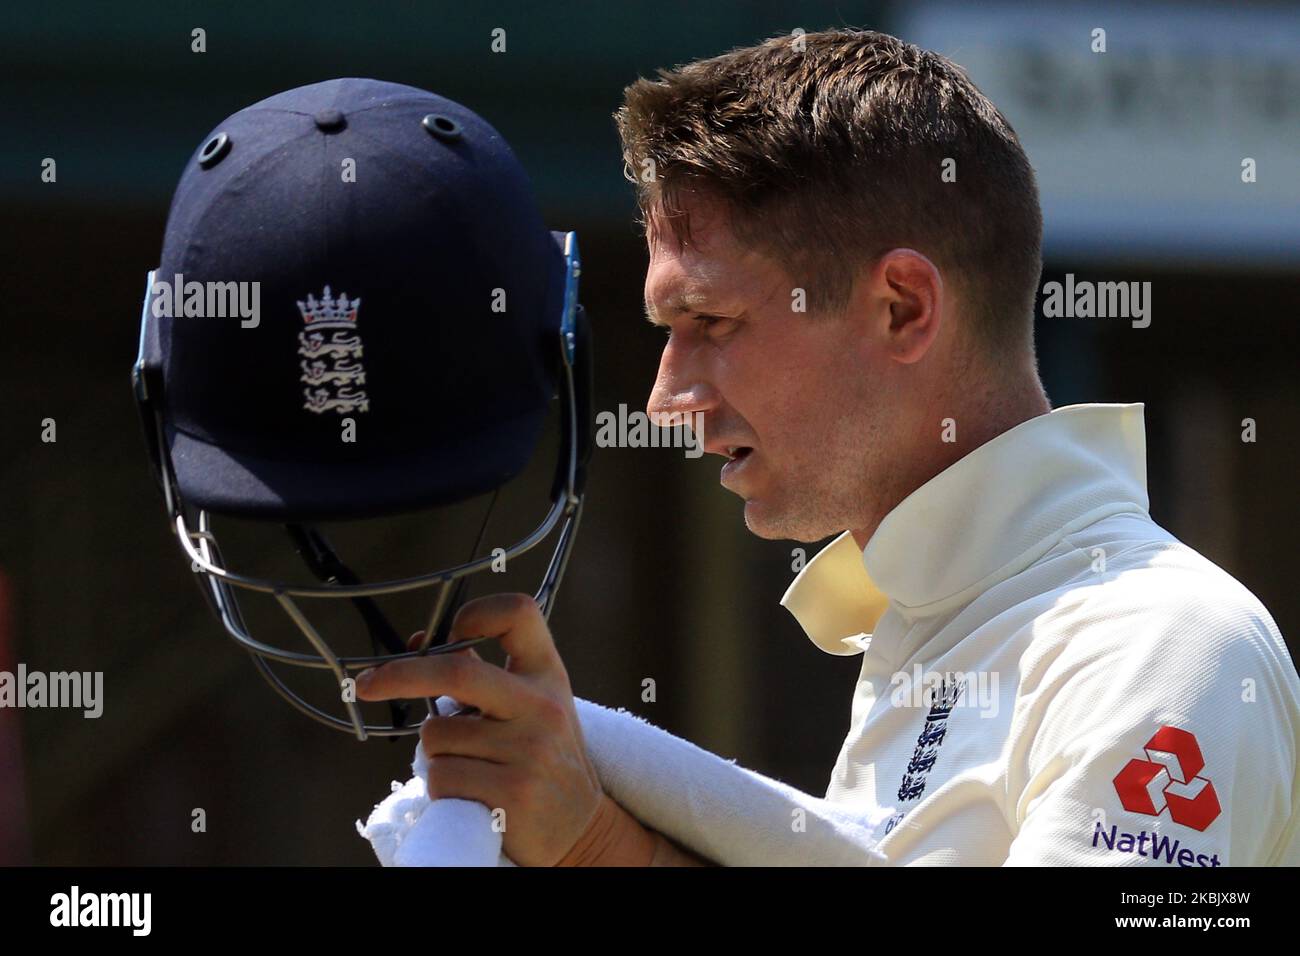 England cricketer Joe Denly leaves the field after he was dismissed during the first day of the 2nd Warm up cricket match between Sri Lanka's Board President's XI and England at P Sara Oval on March 12, 2020 in Colombo, Sri Lanka. (Photo by Tharaka Basnayaka/NurPhoto) Stock Photo